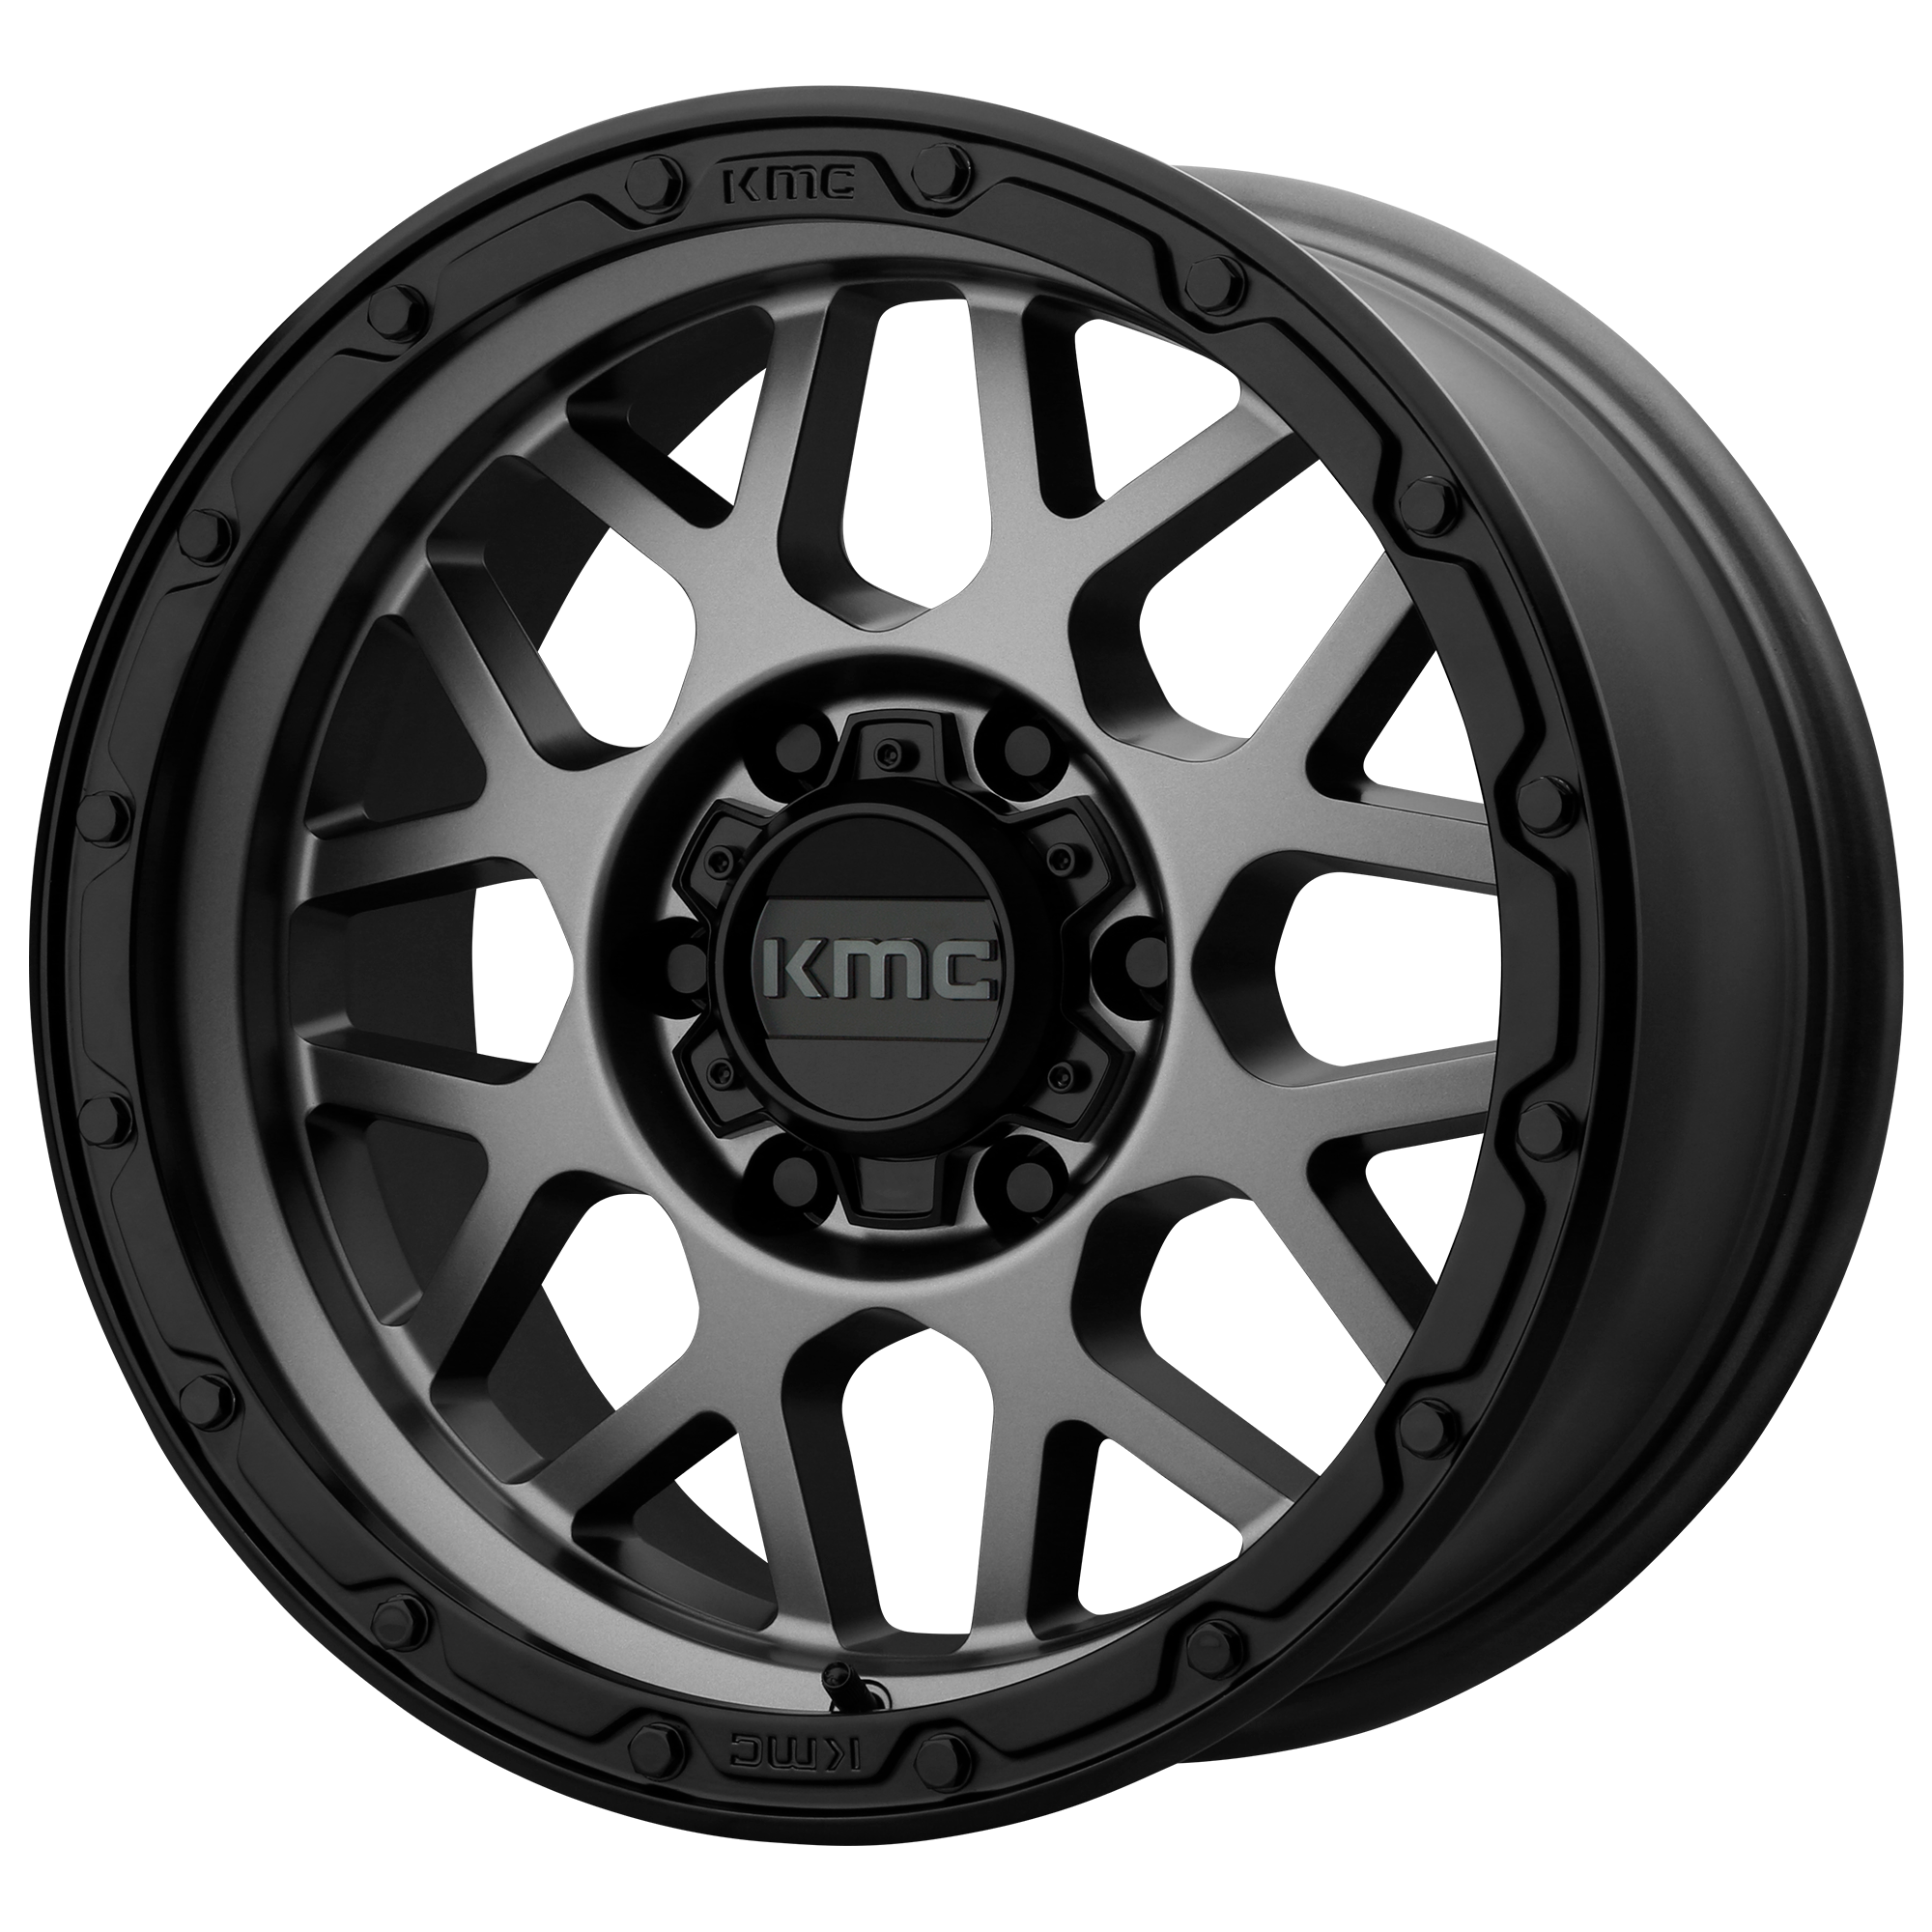 GRENADE OFF-ROAD 17x8.5 6x139.70 MATTE GRAY W/ MATTE BLACK LIP (0 mm) - Tires and Engine Performance